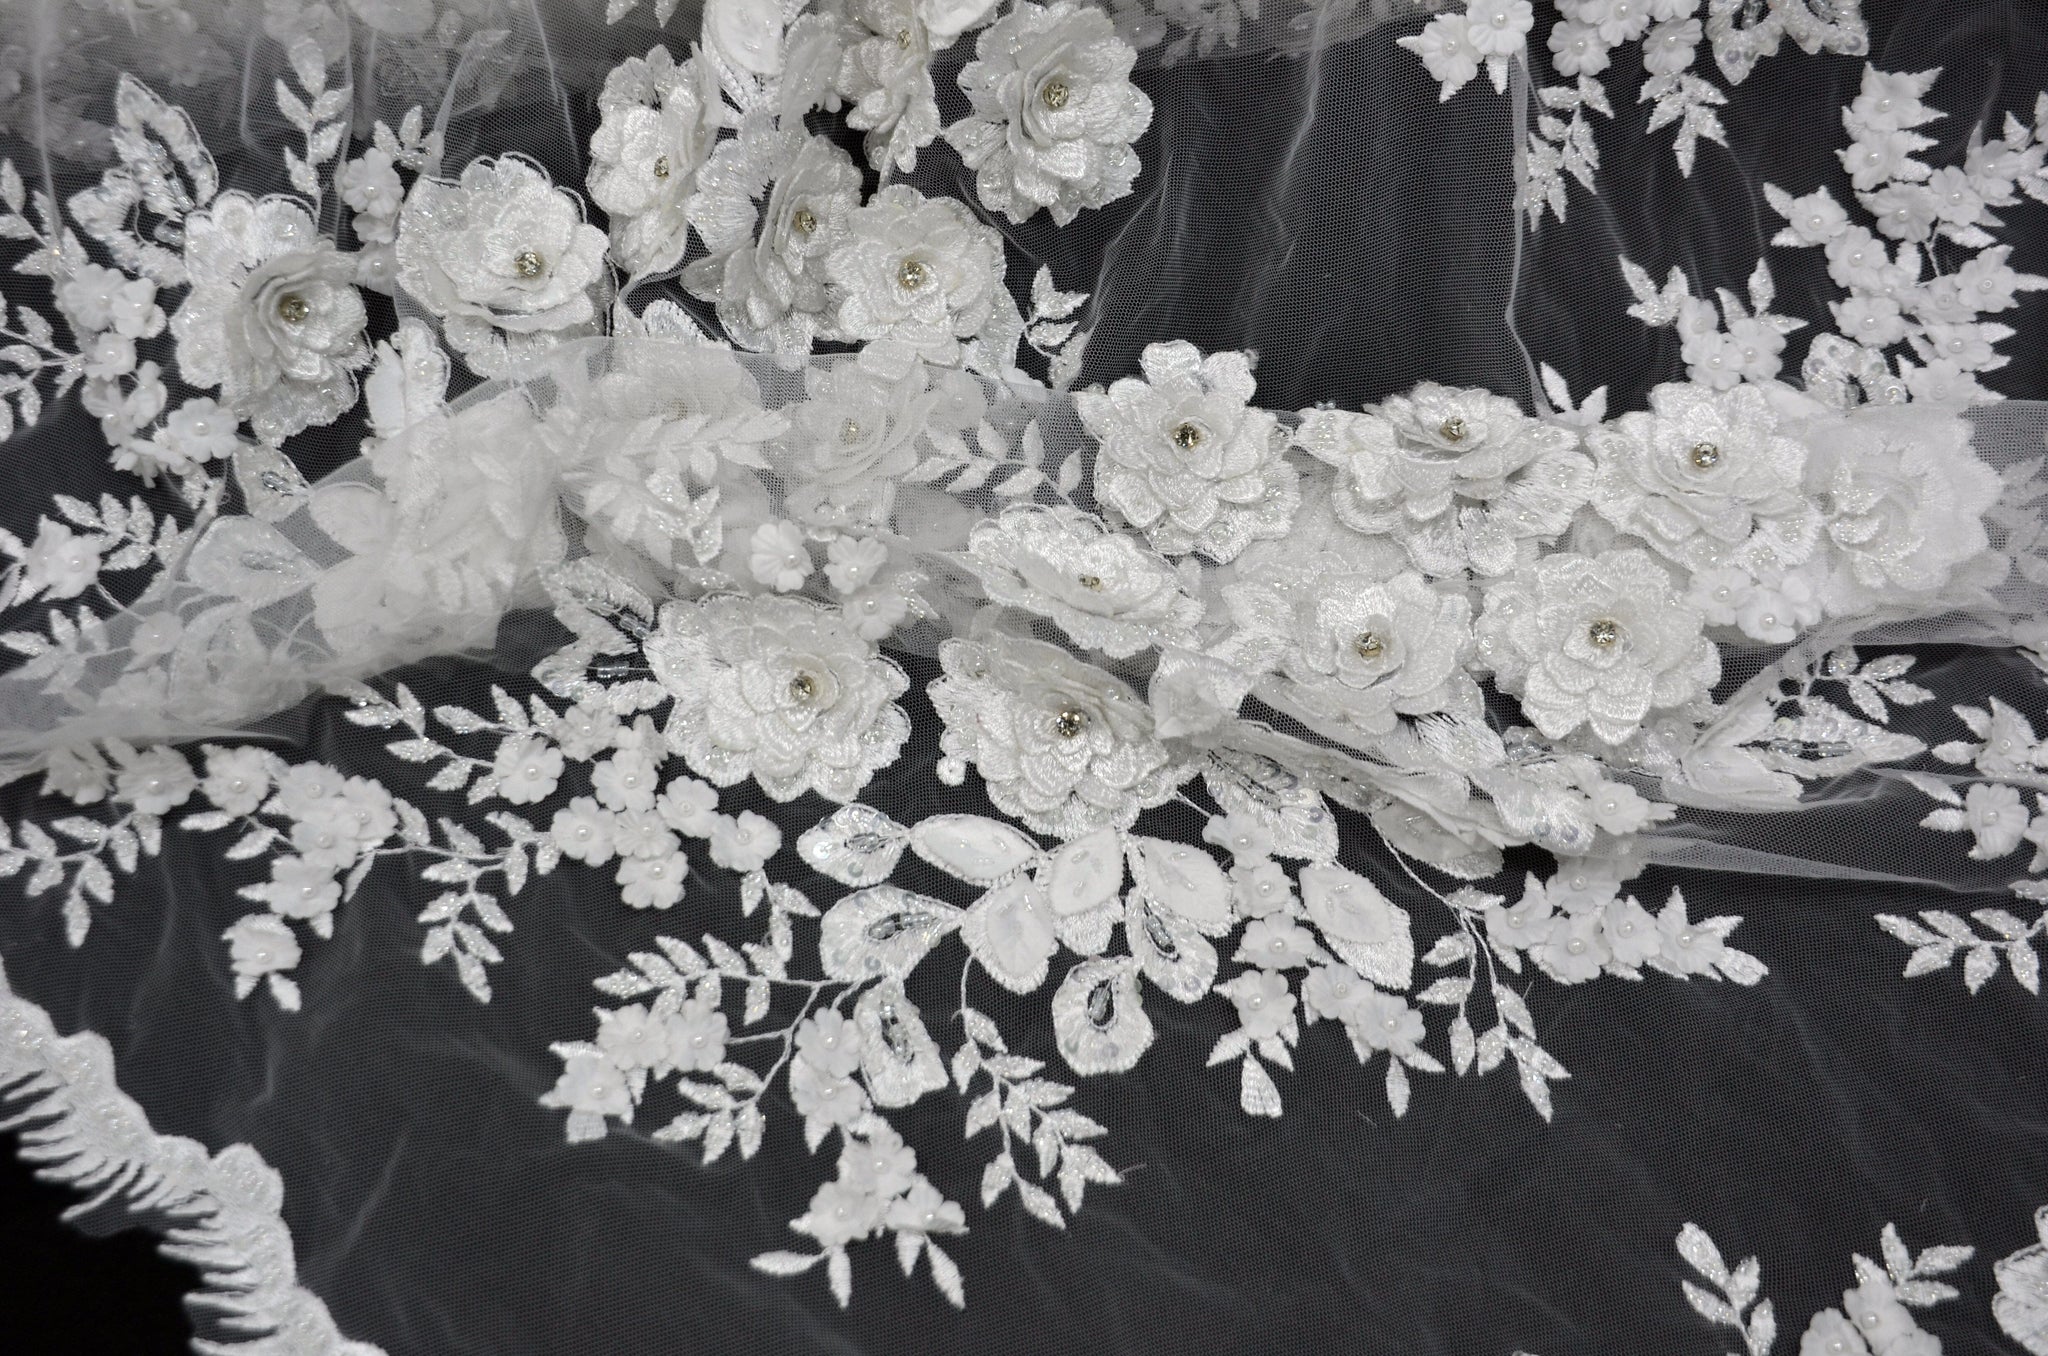 Lace Fabric - Black, White, Embroidered & More